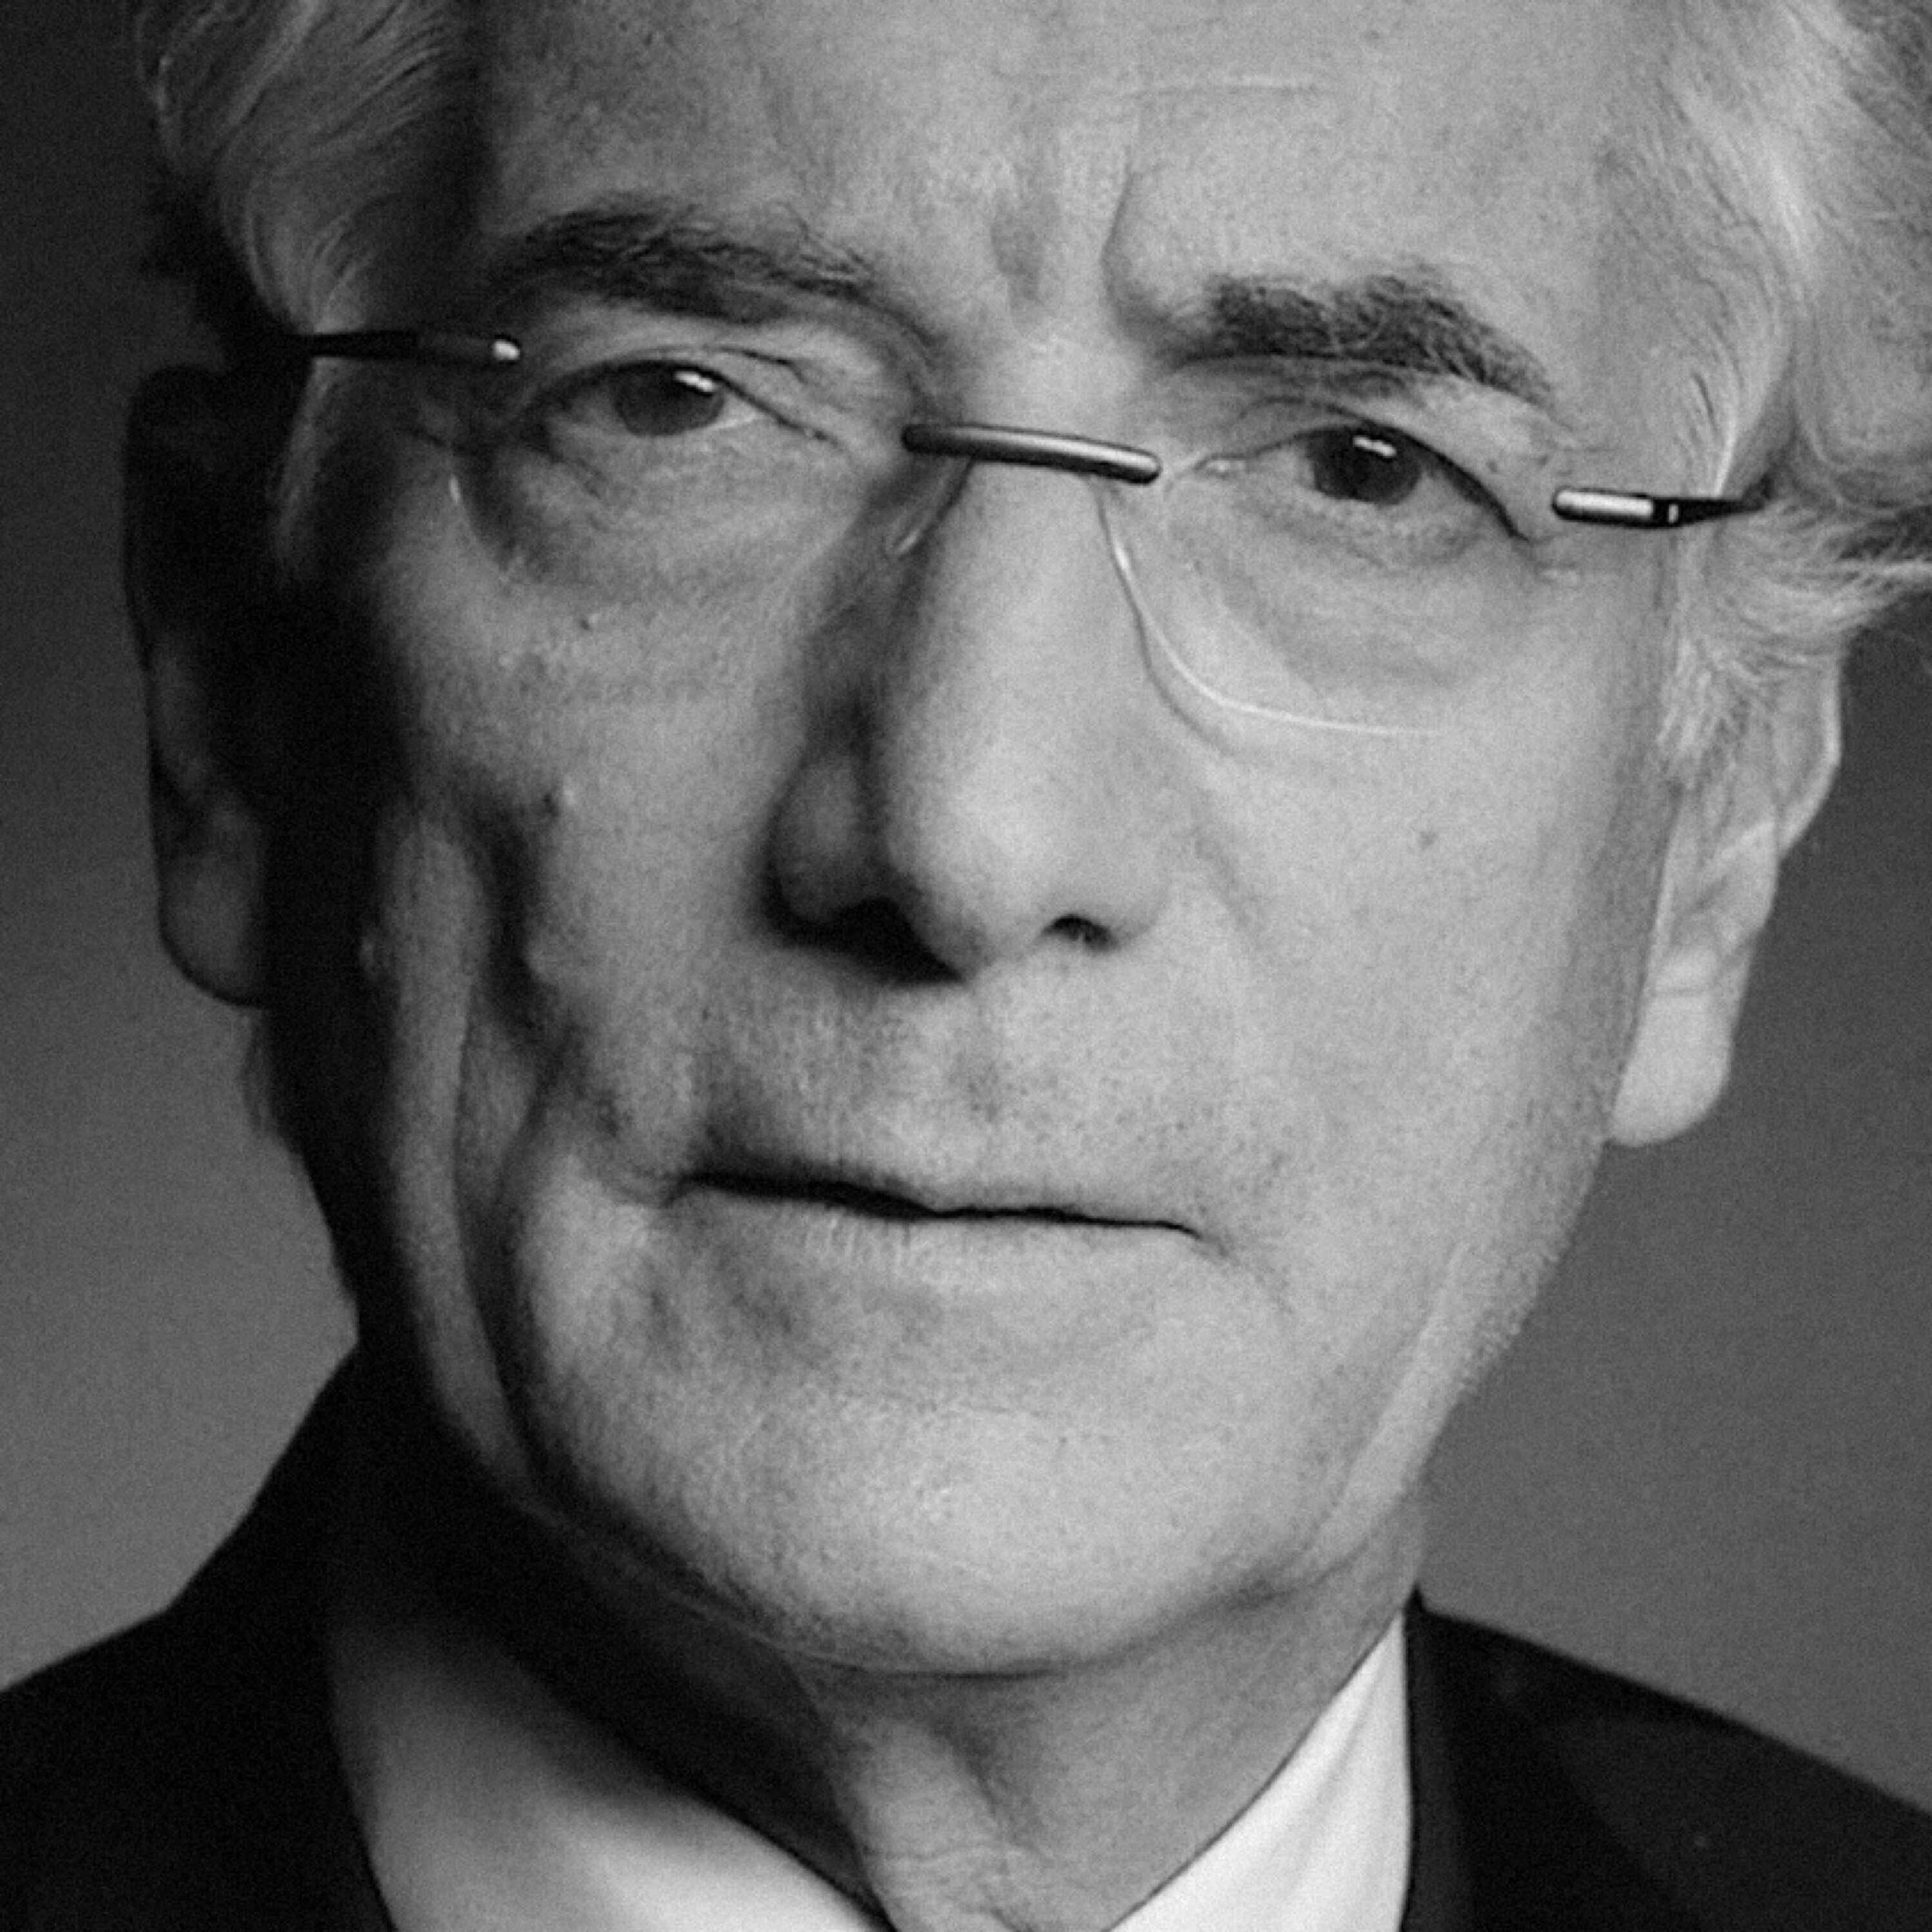 Episode 191: Sir Ronald Cohen, ”the father of social investment,” discusses how to reshape capitalism to drive real change.